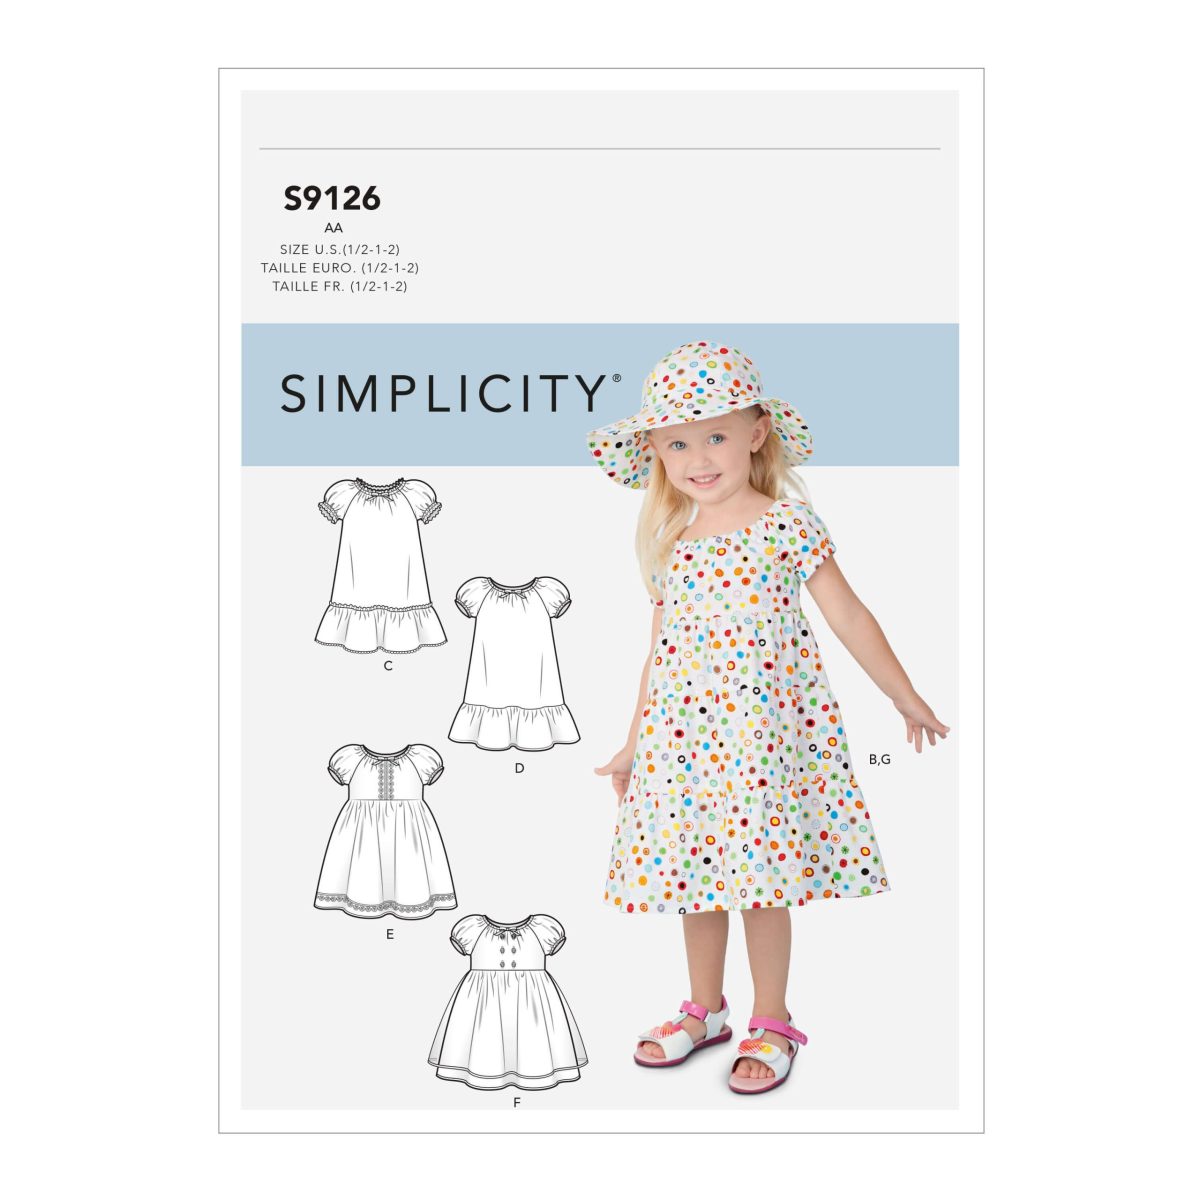 Simplicity Sewing Pattern S9126 Toddlers' Dresses